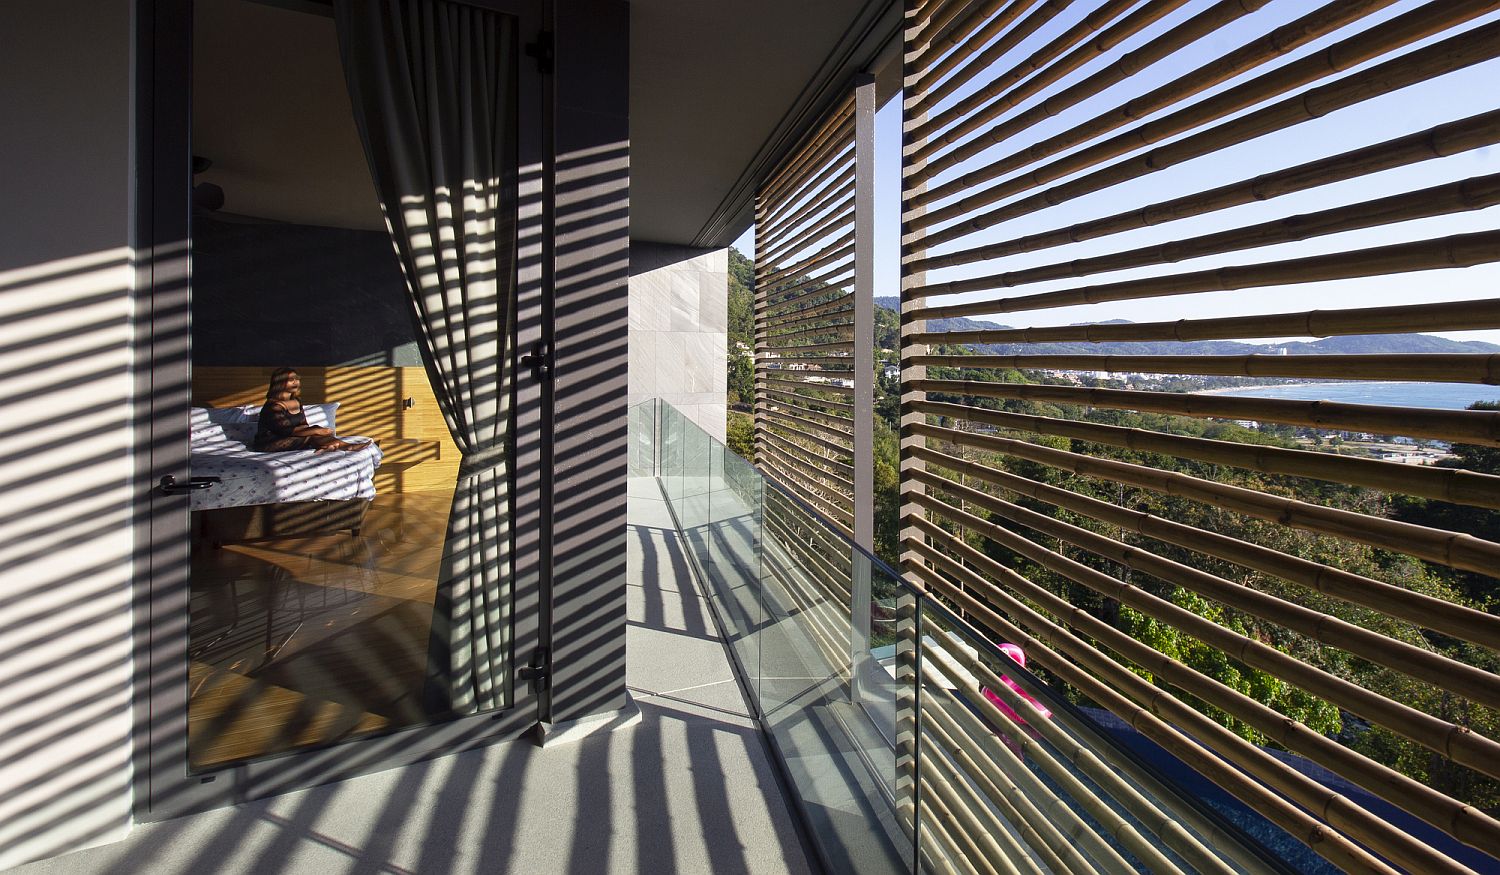 Closer look at the unique bamboo shades at the Thai home